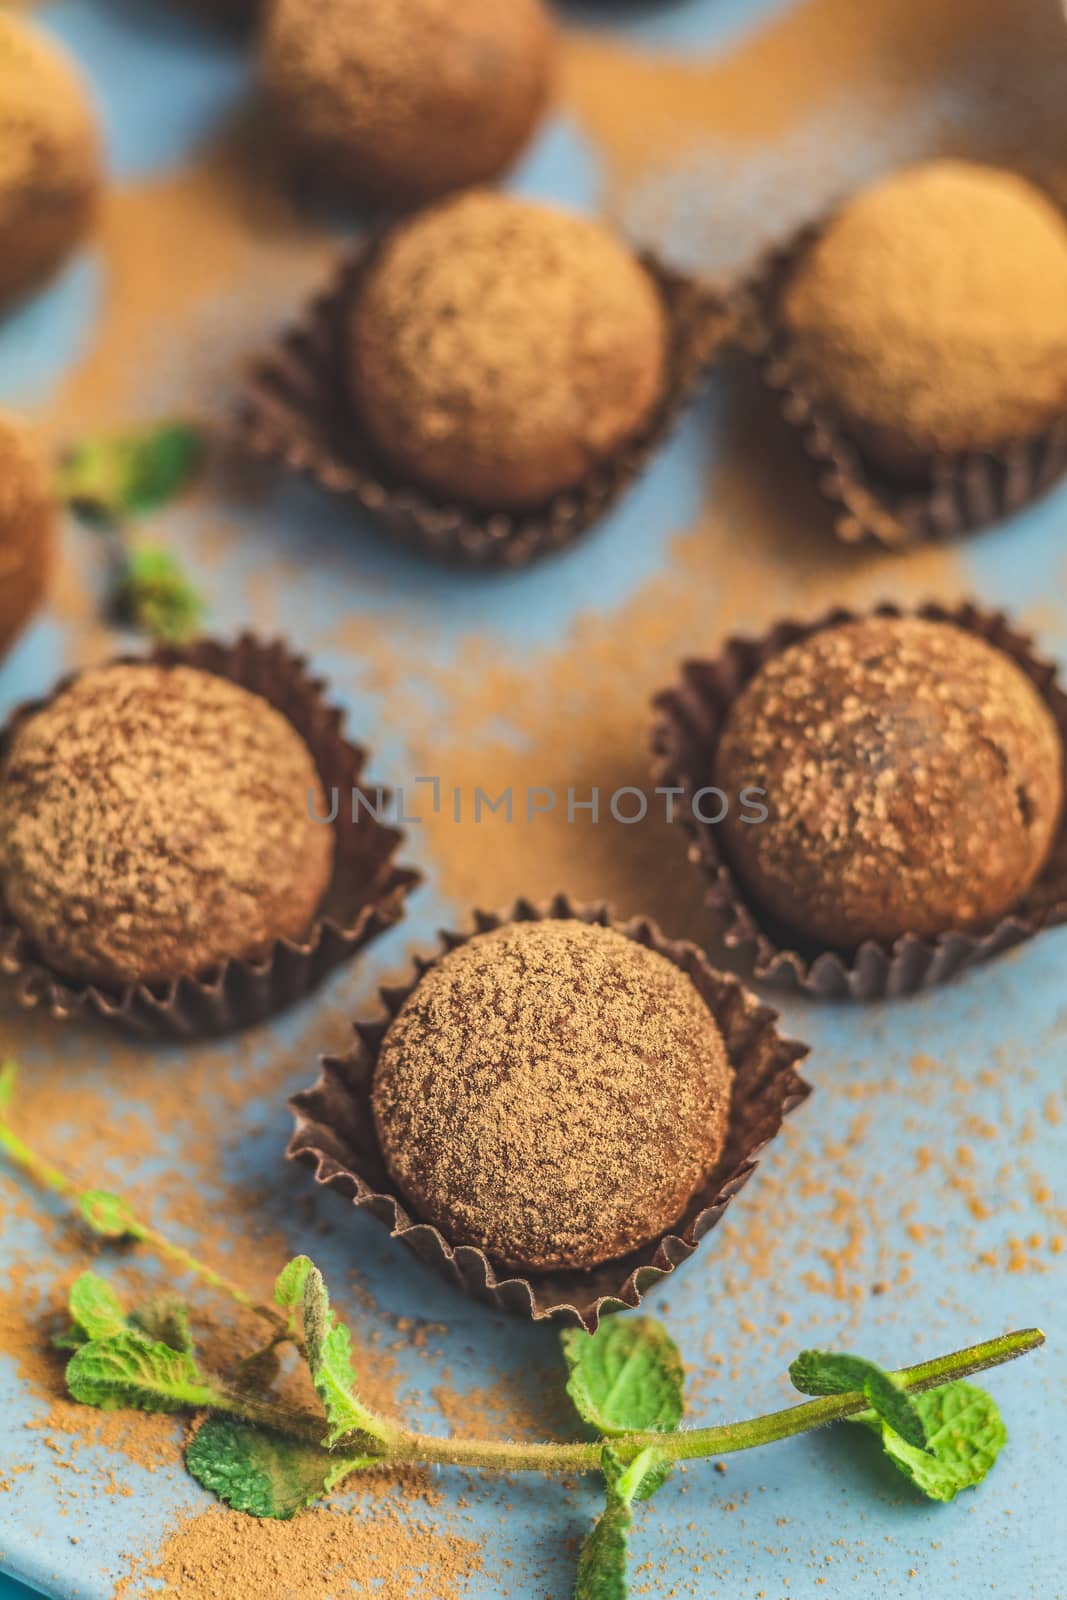 Cocoa balls, handmade chocolate balls cakes in a blue tray by ArtSvitlyna